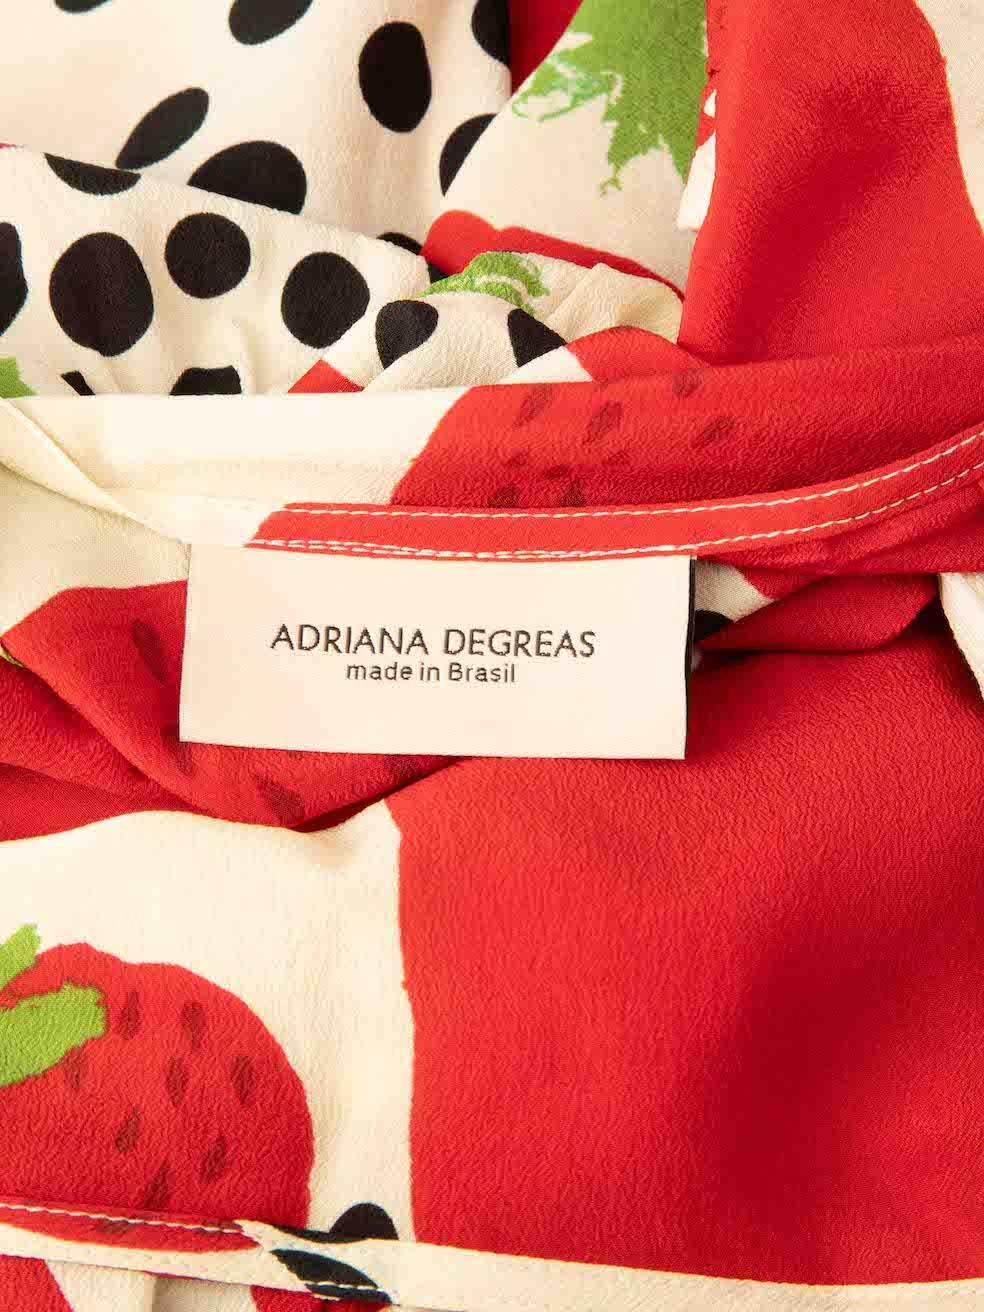 Adriana Degreas Strawberry Print Knee Length Skirt Size M For Sale 3